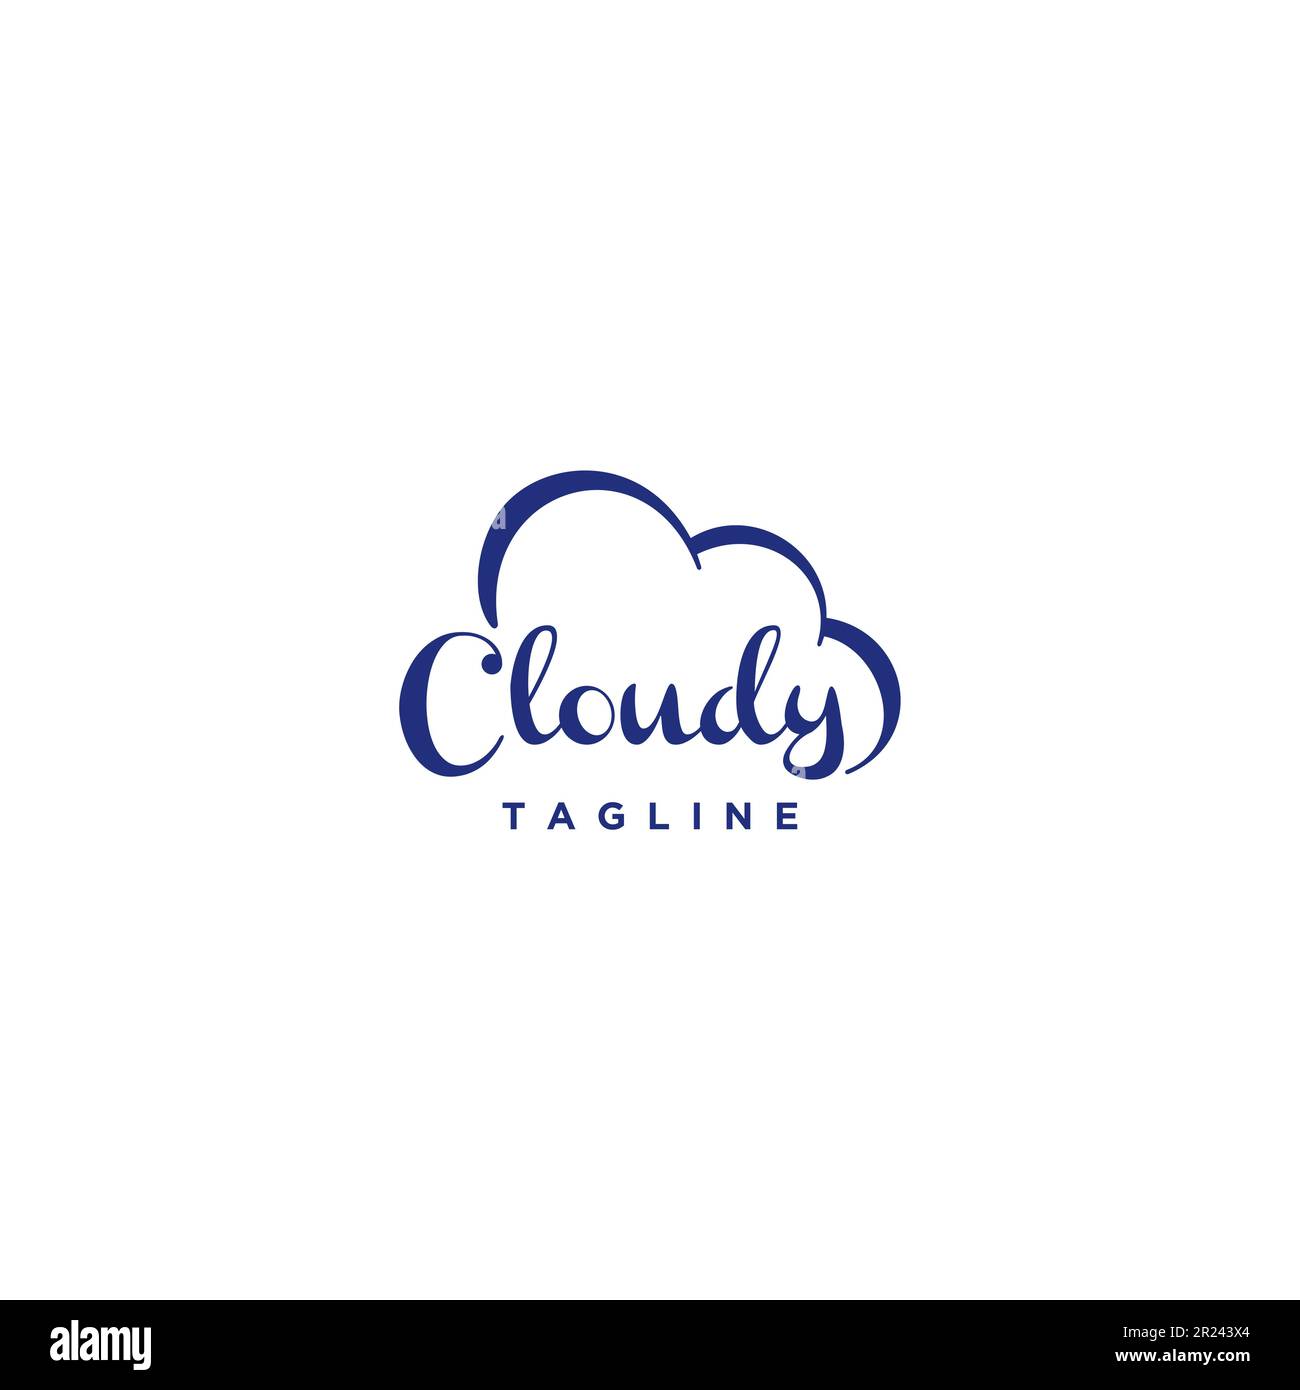 Cloud word mark logo design. The word mark is designed with script letters from the word cloud with an accent that forms the cloud. Stock Vector